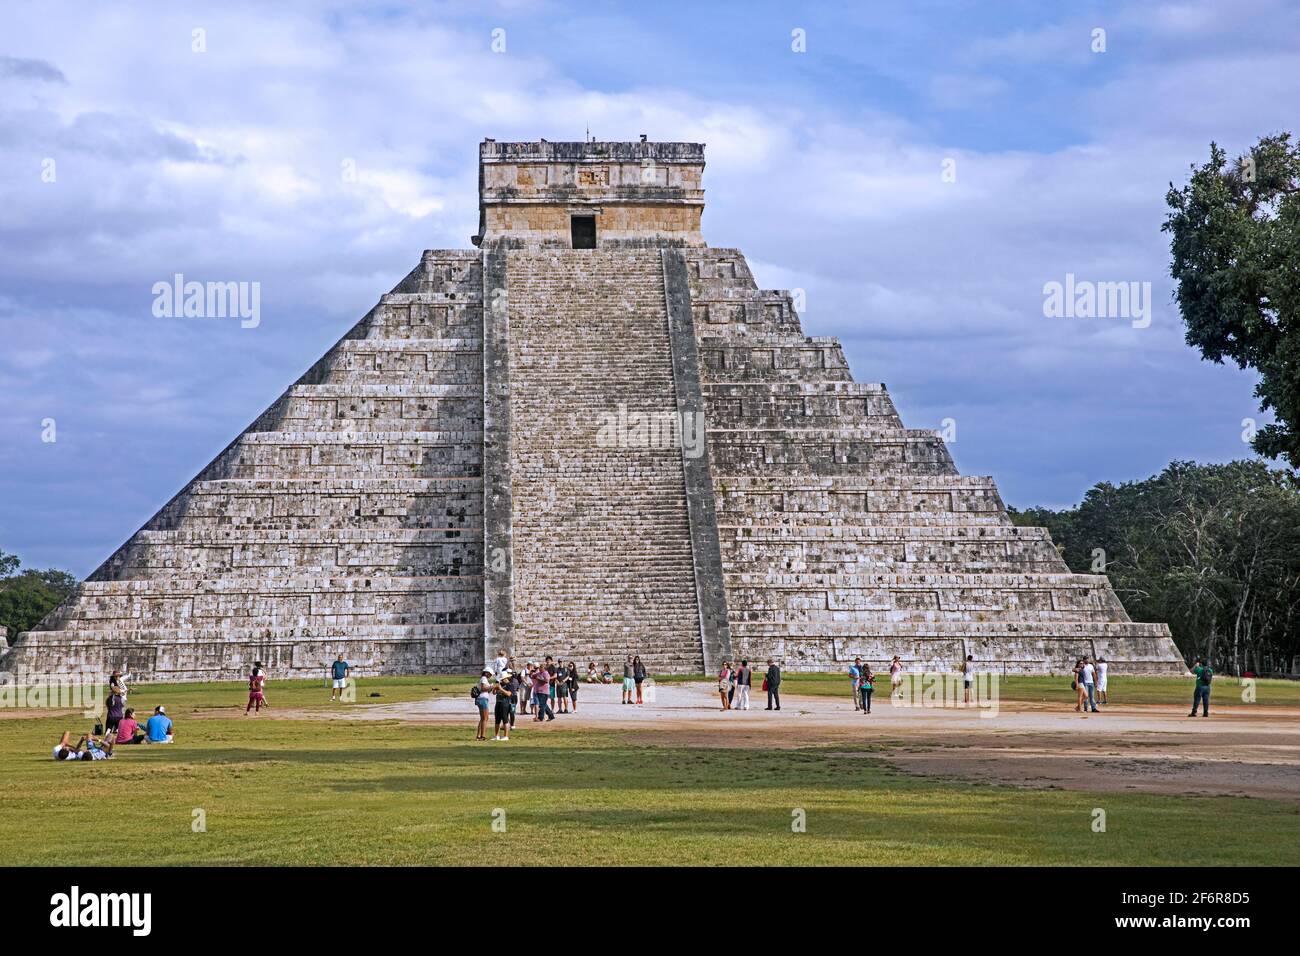 El Castillo / Kukulcán Temple, Mesoamerican step-pyramid at the pre-Columbian city Chichen Itza, archaeological site in Yucatán, Mexico Stock Photo